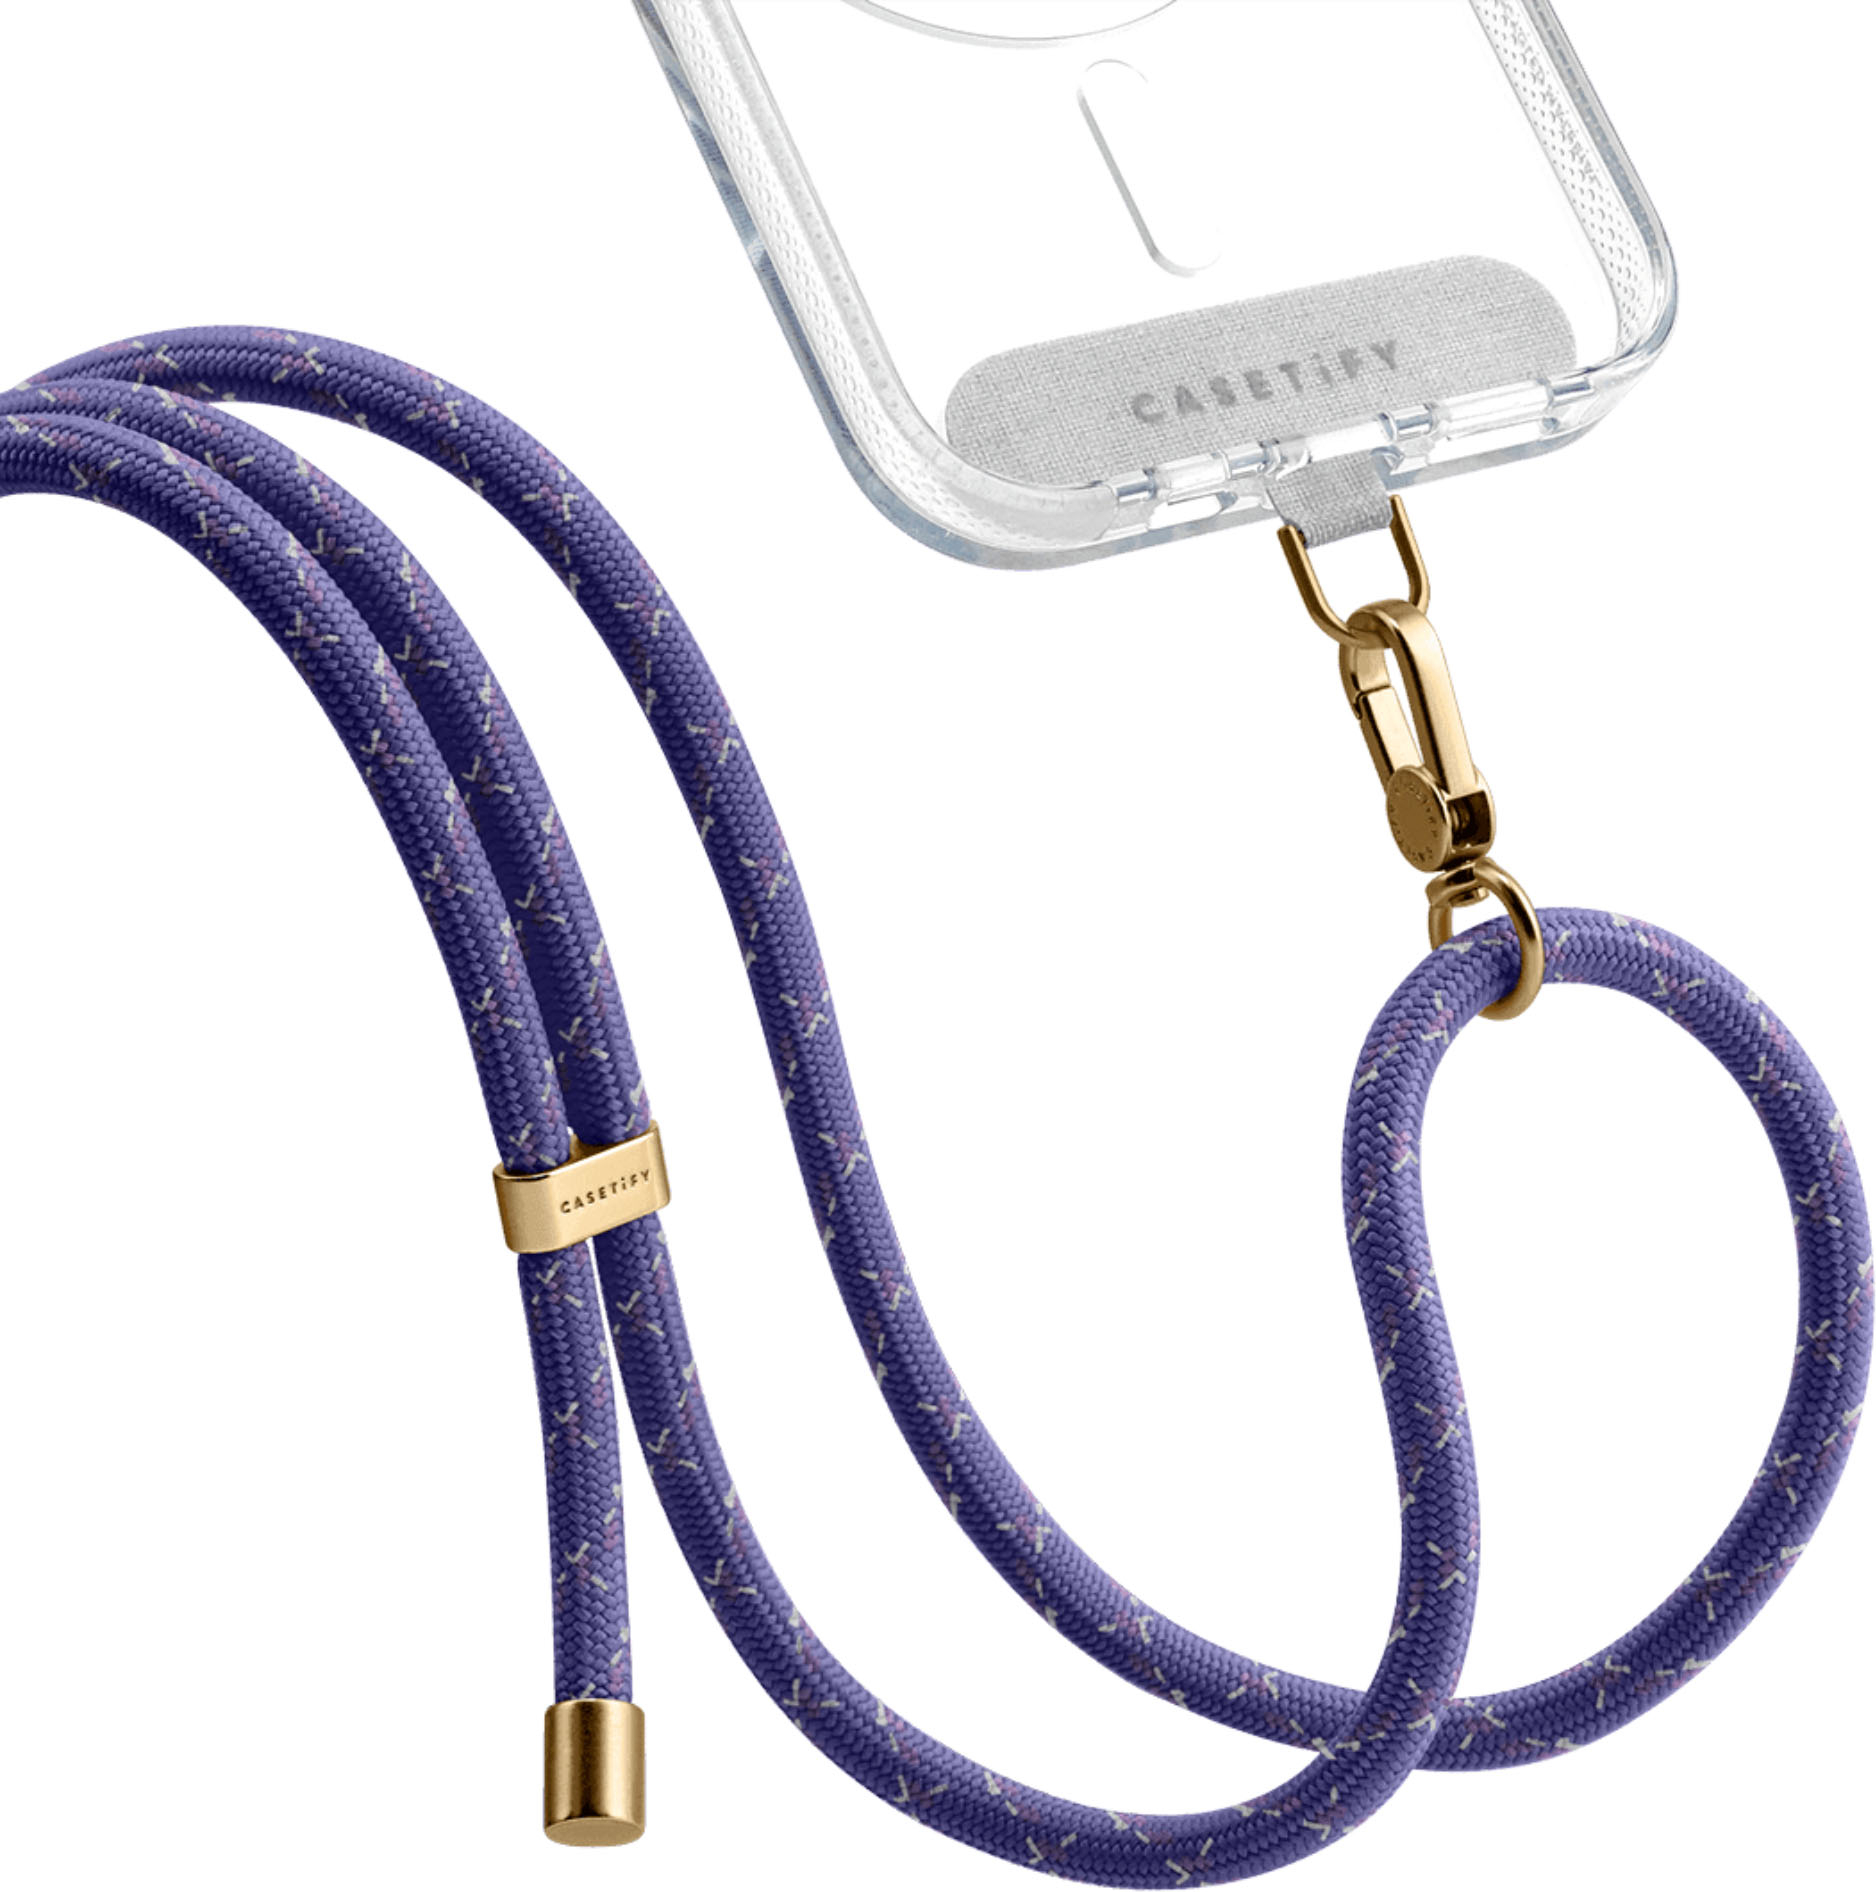 Angle View: CASETiFY - Rope Cross-body Phone Strap Compatible with Most Cell Phone Devices - Peri Purple/Reflective